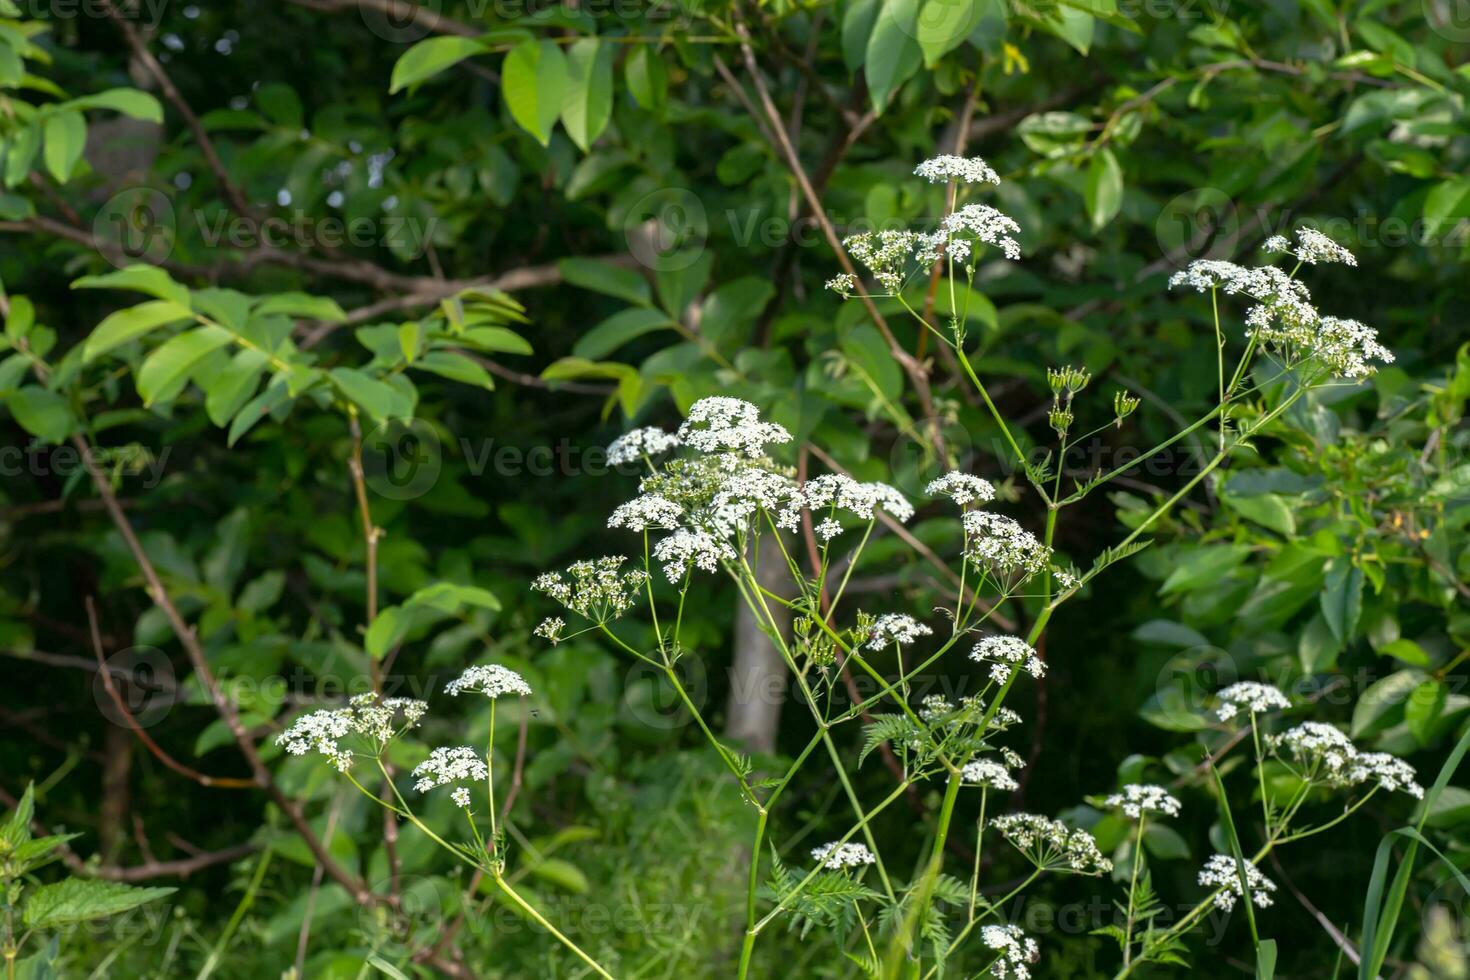 Anthriscus sylvestris, cow parsley, wild chervil, wild beaked parsley, Queen Anne's lace or keck, mother-die an edible plant used in cooking as a condiment during flowering. White small flowers collected in an umbrella with leaves and buds. photo